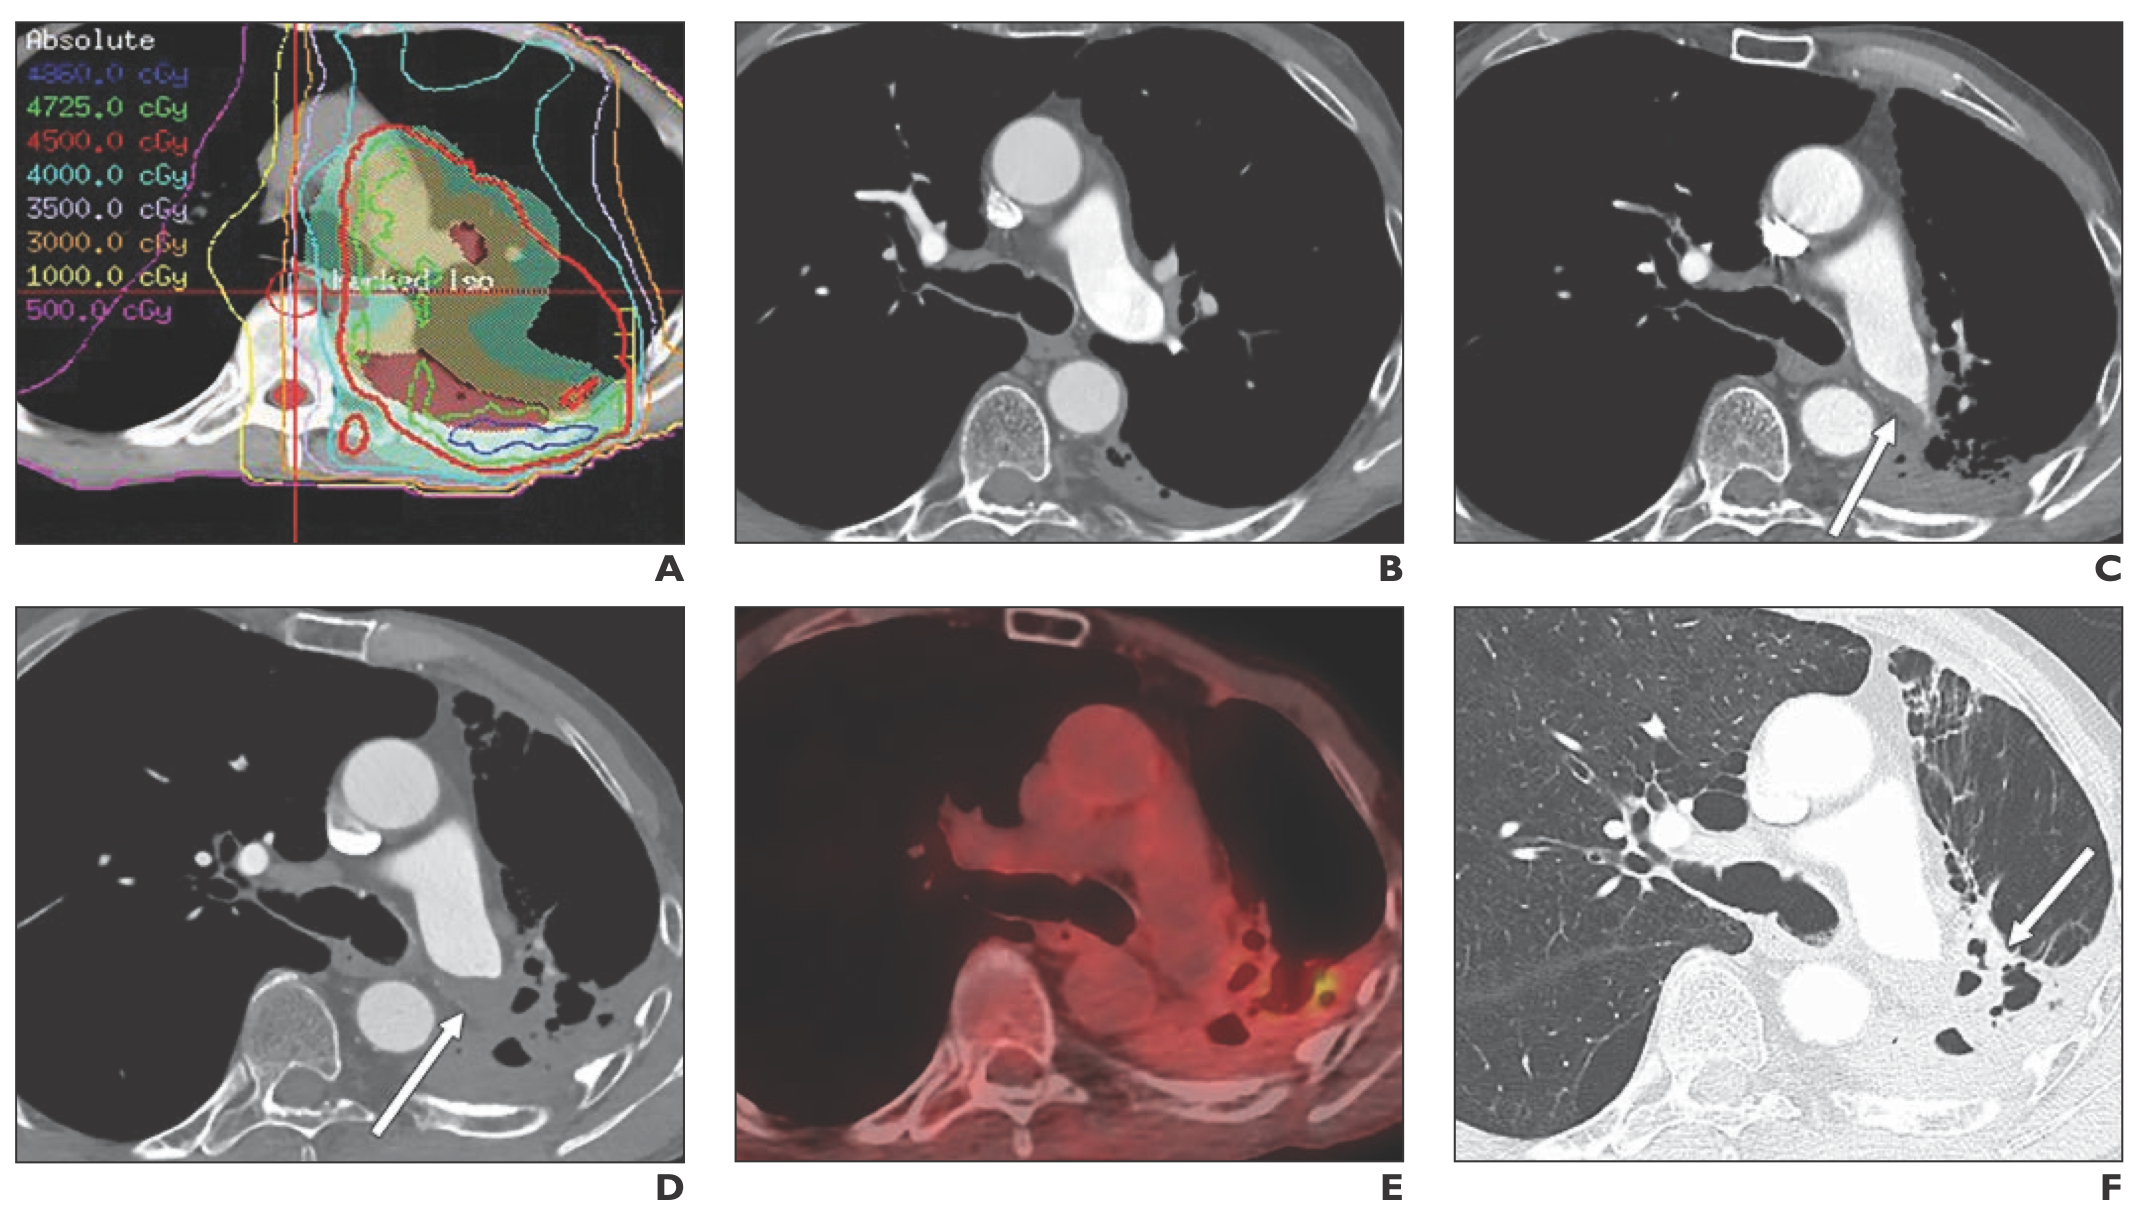 Pulmonary Artery Thrombosis: An Unrecognized Radiation Therapy Complication